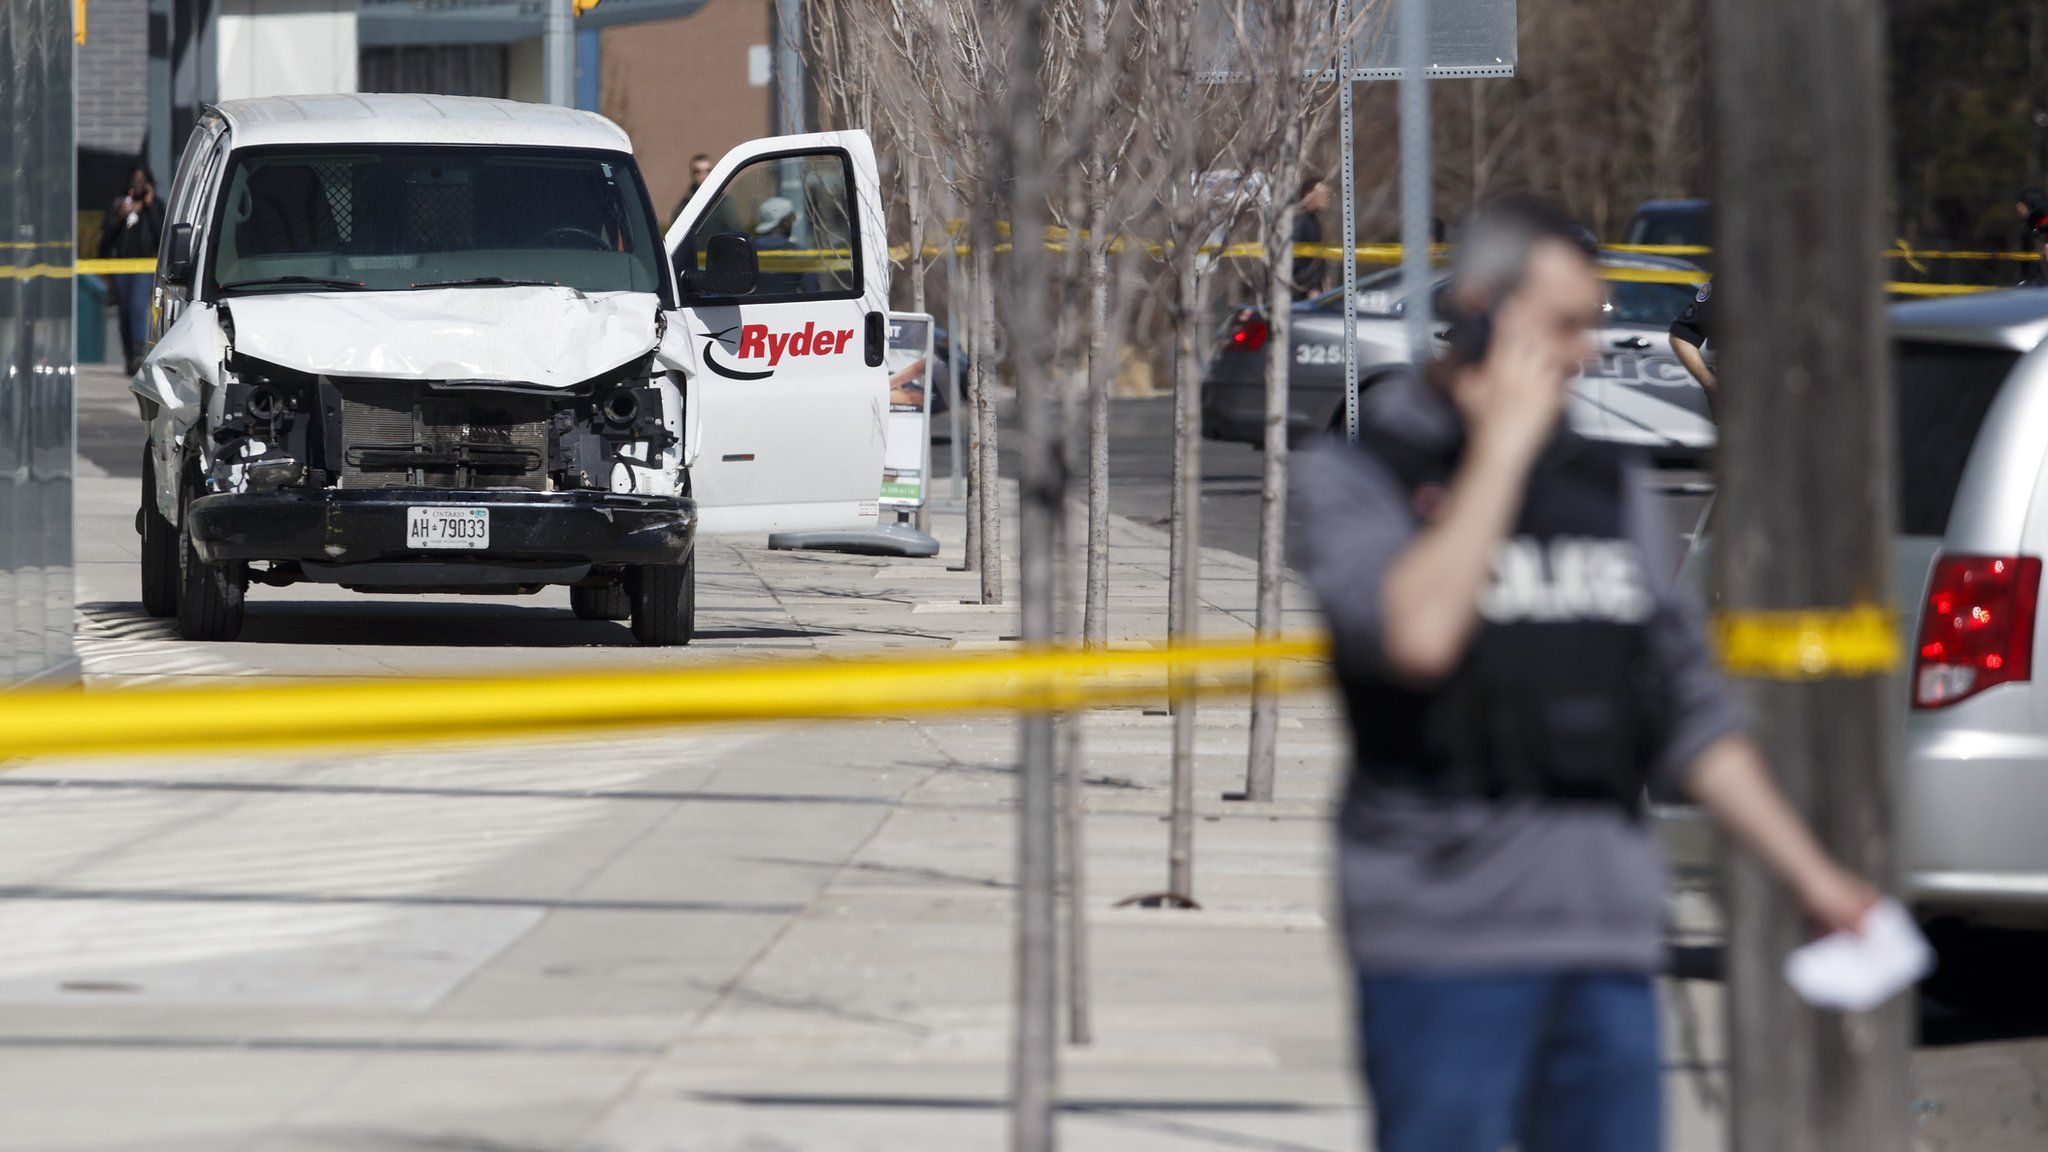 Police inspect a van suspected of being involved in fatal collision in Toronto on April 23, 2018